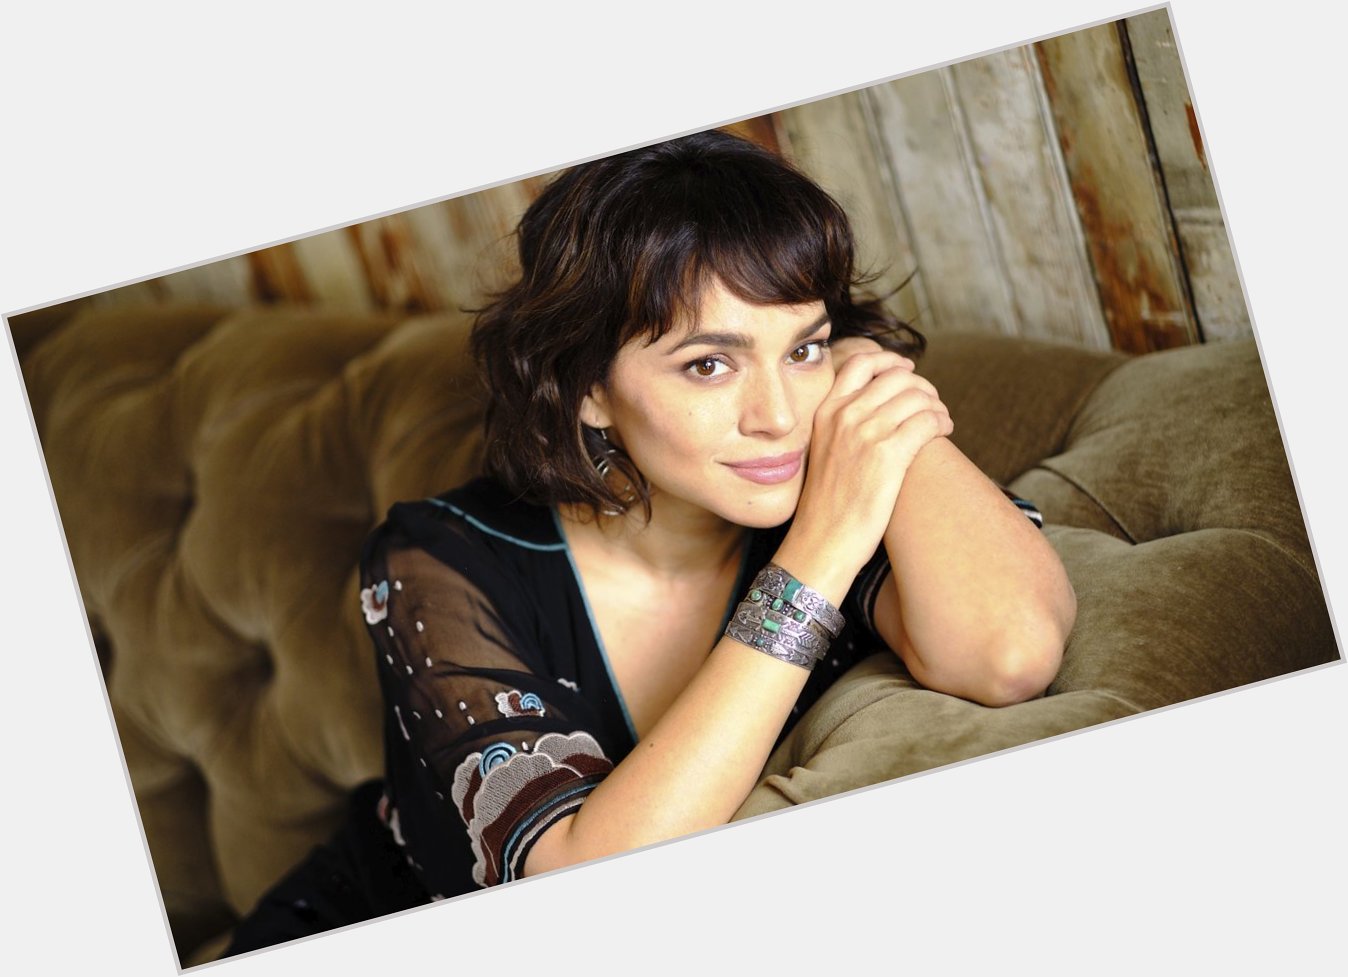 Please join me here at in wishing the one and only Norah Jones a very Happy Birthday today  